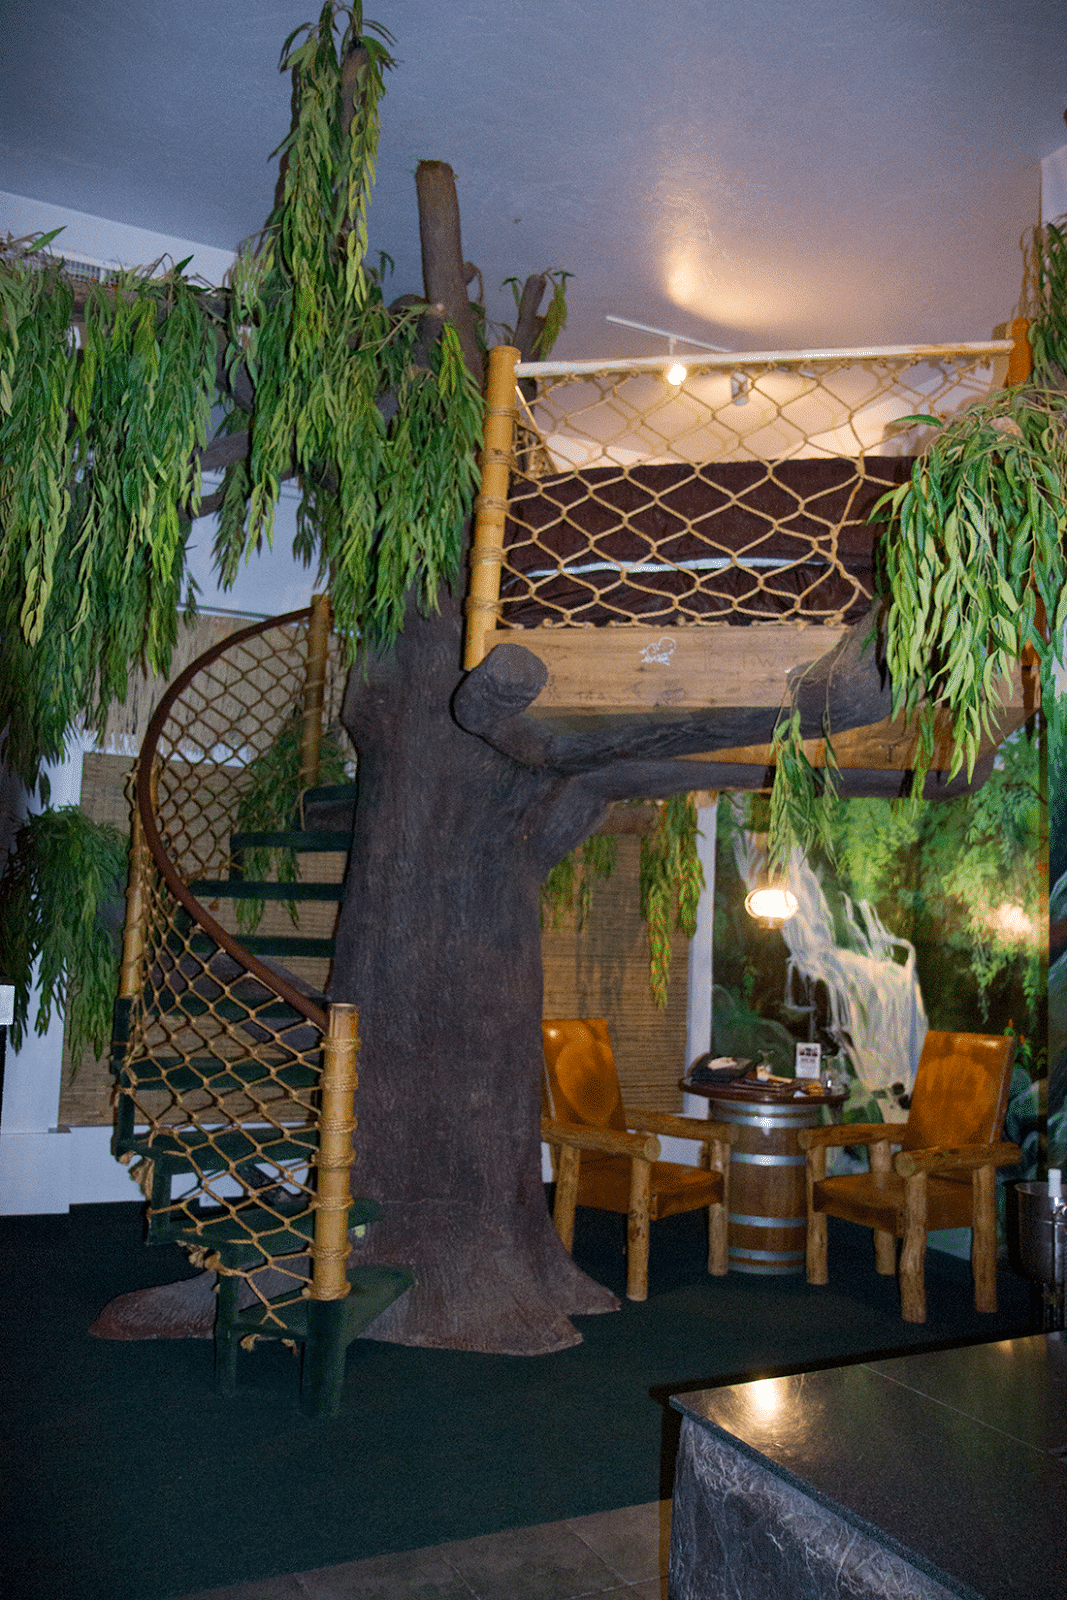 The treehouse bed at the Swiss Family Robinson Room at the Anniversary Inn. 